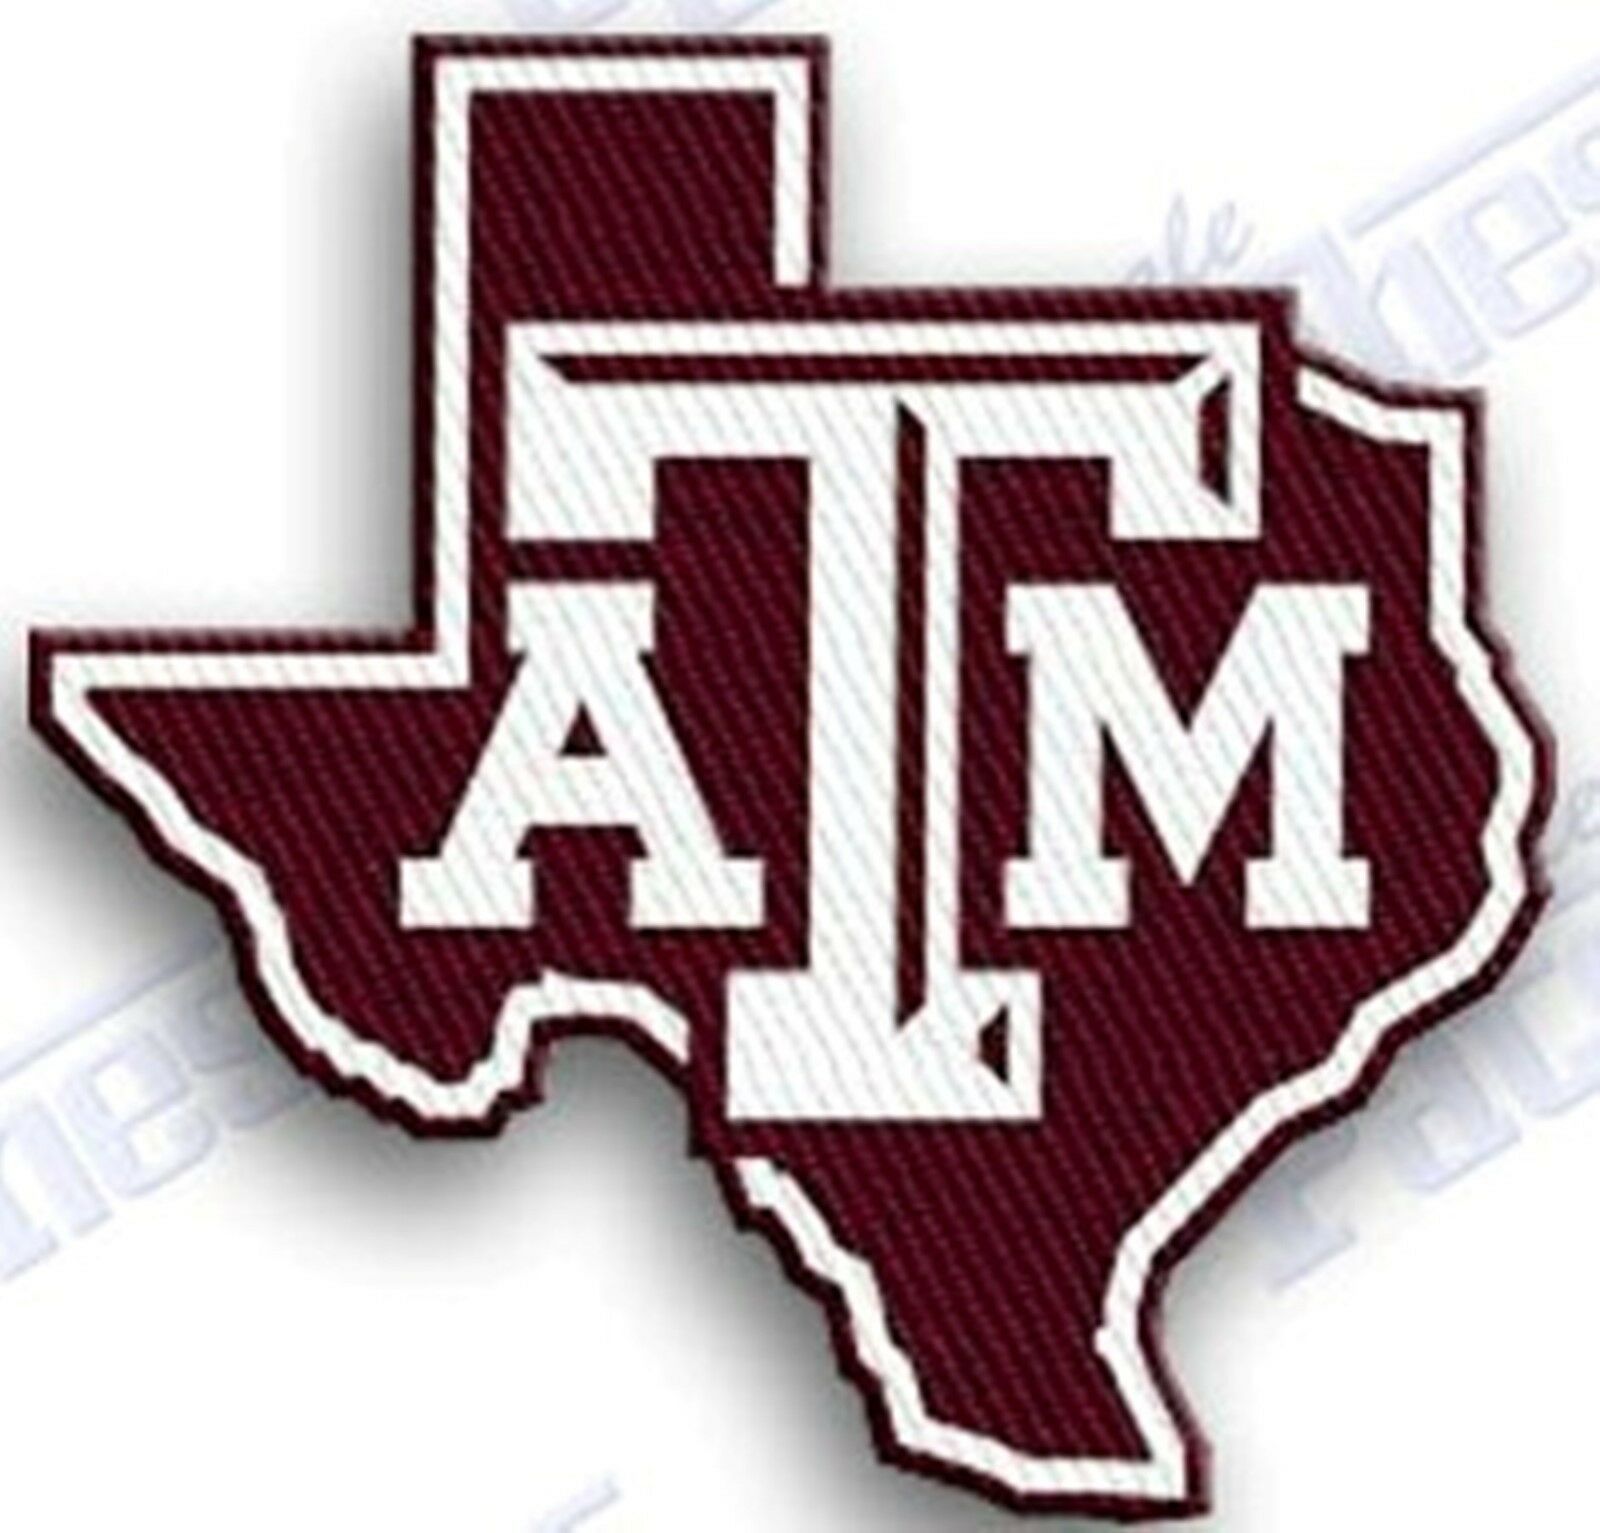 TEXAS A & M AGGIES  iron on embroidered PATCH COLLEGE UNIVERSITY SPORTS SCHOOL. - $11.95